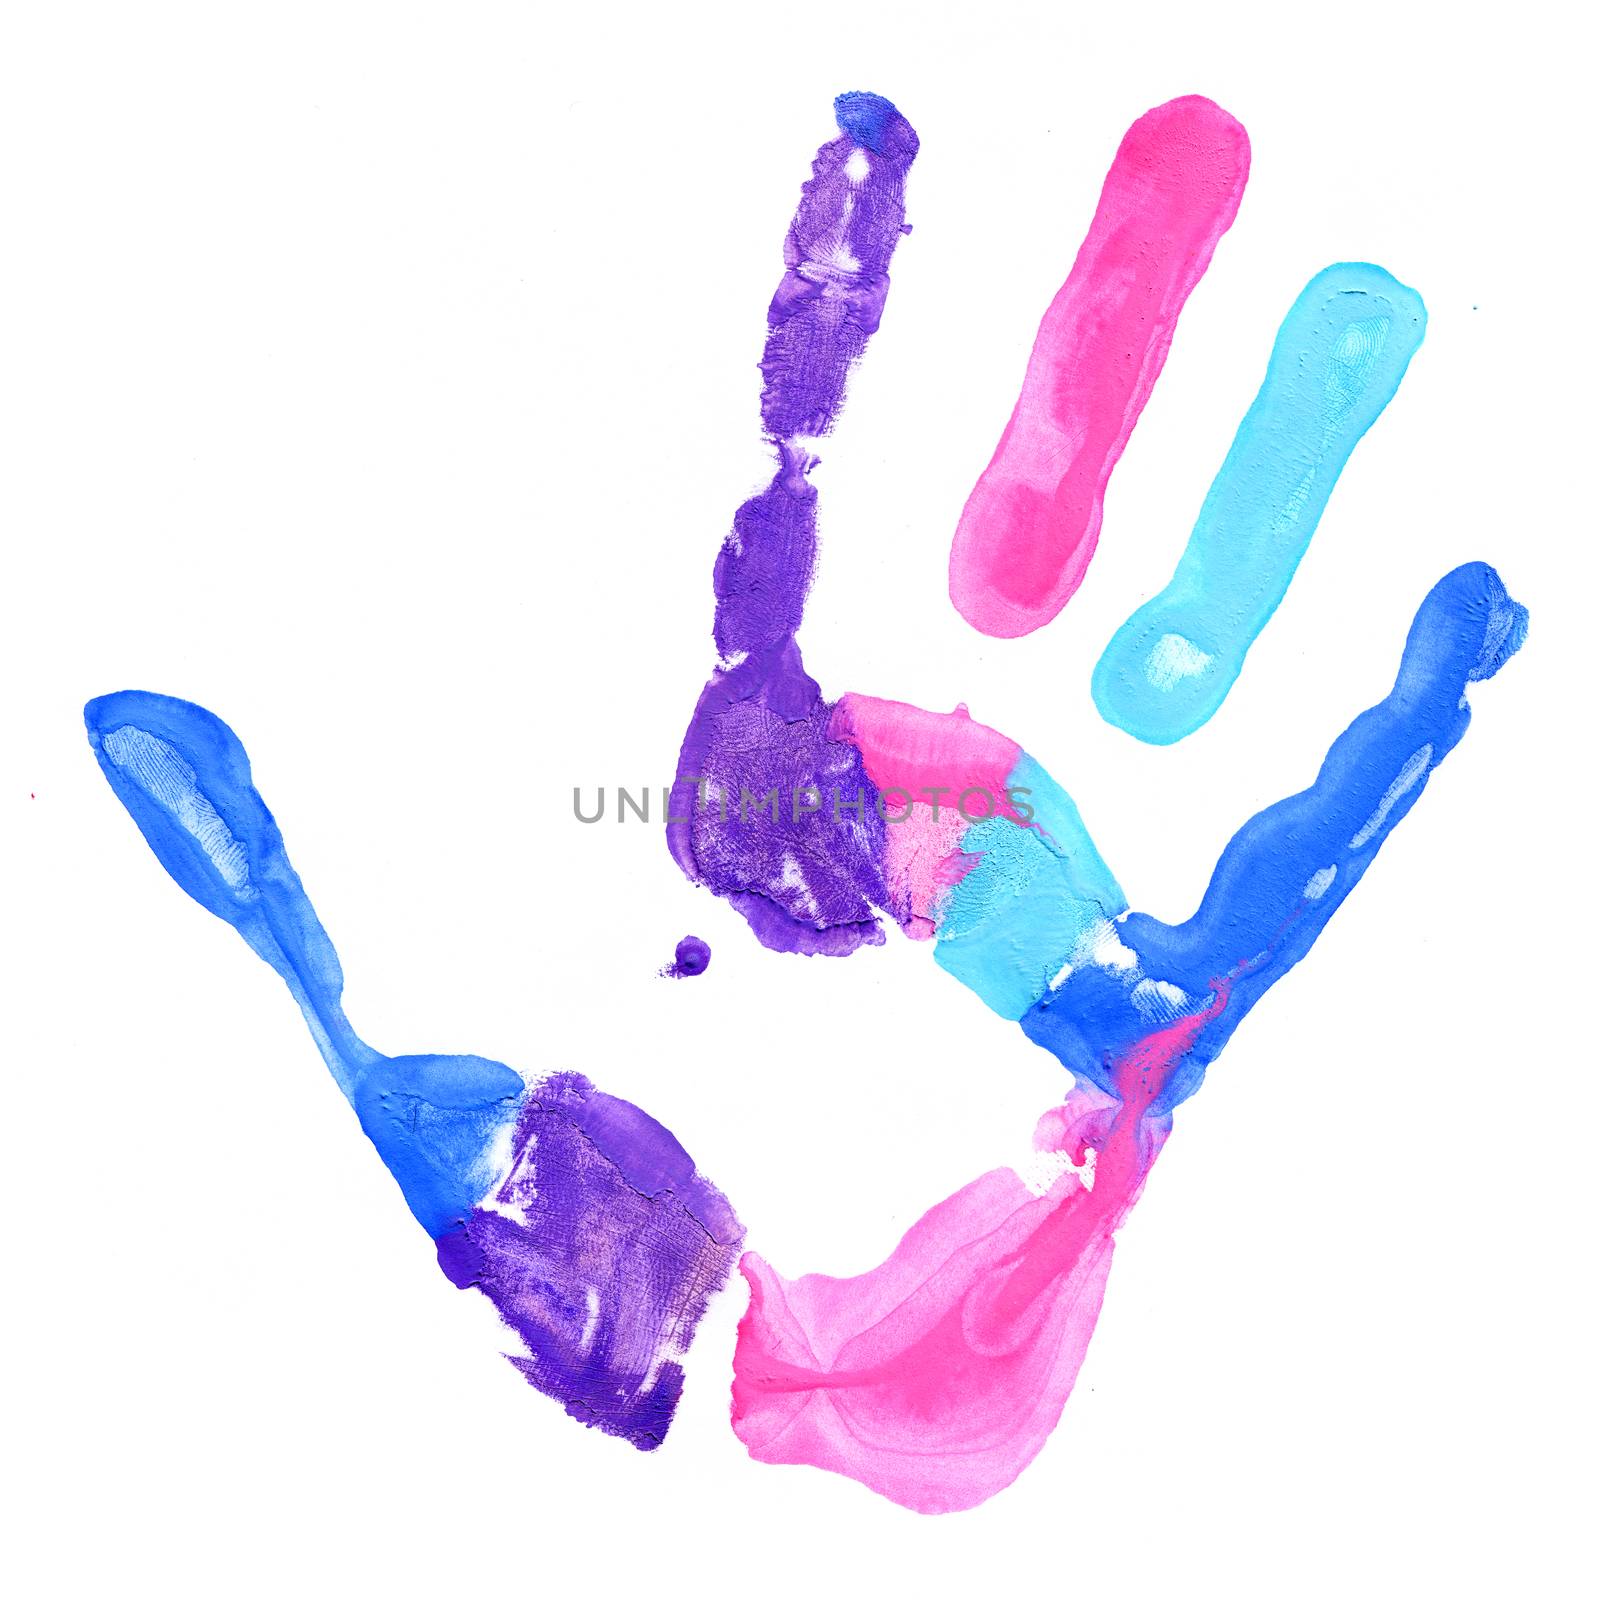 Close up of colored hand print on white by vlad_star